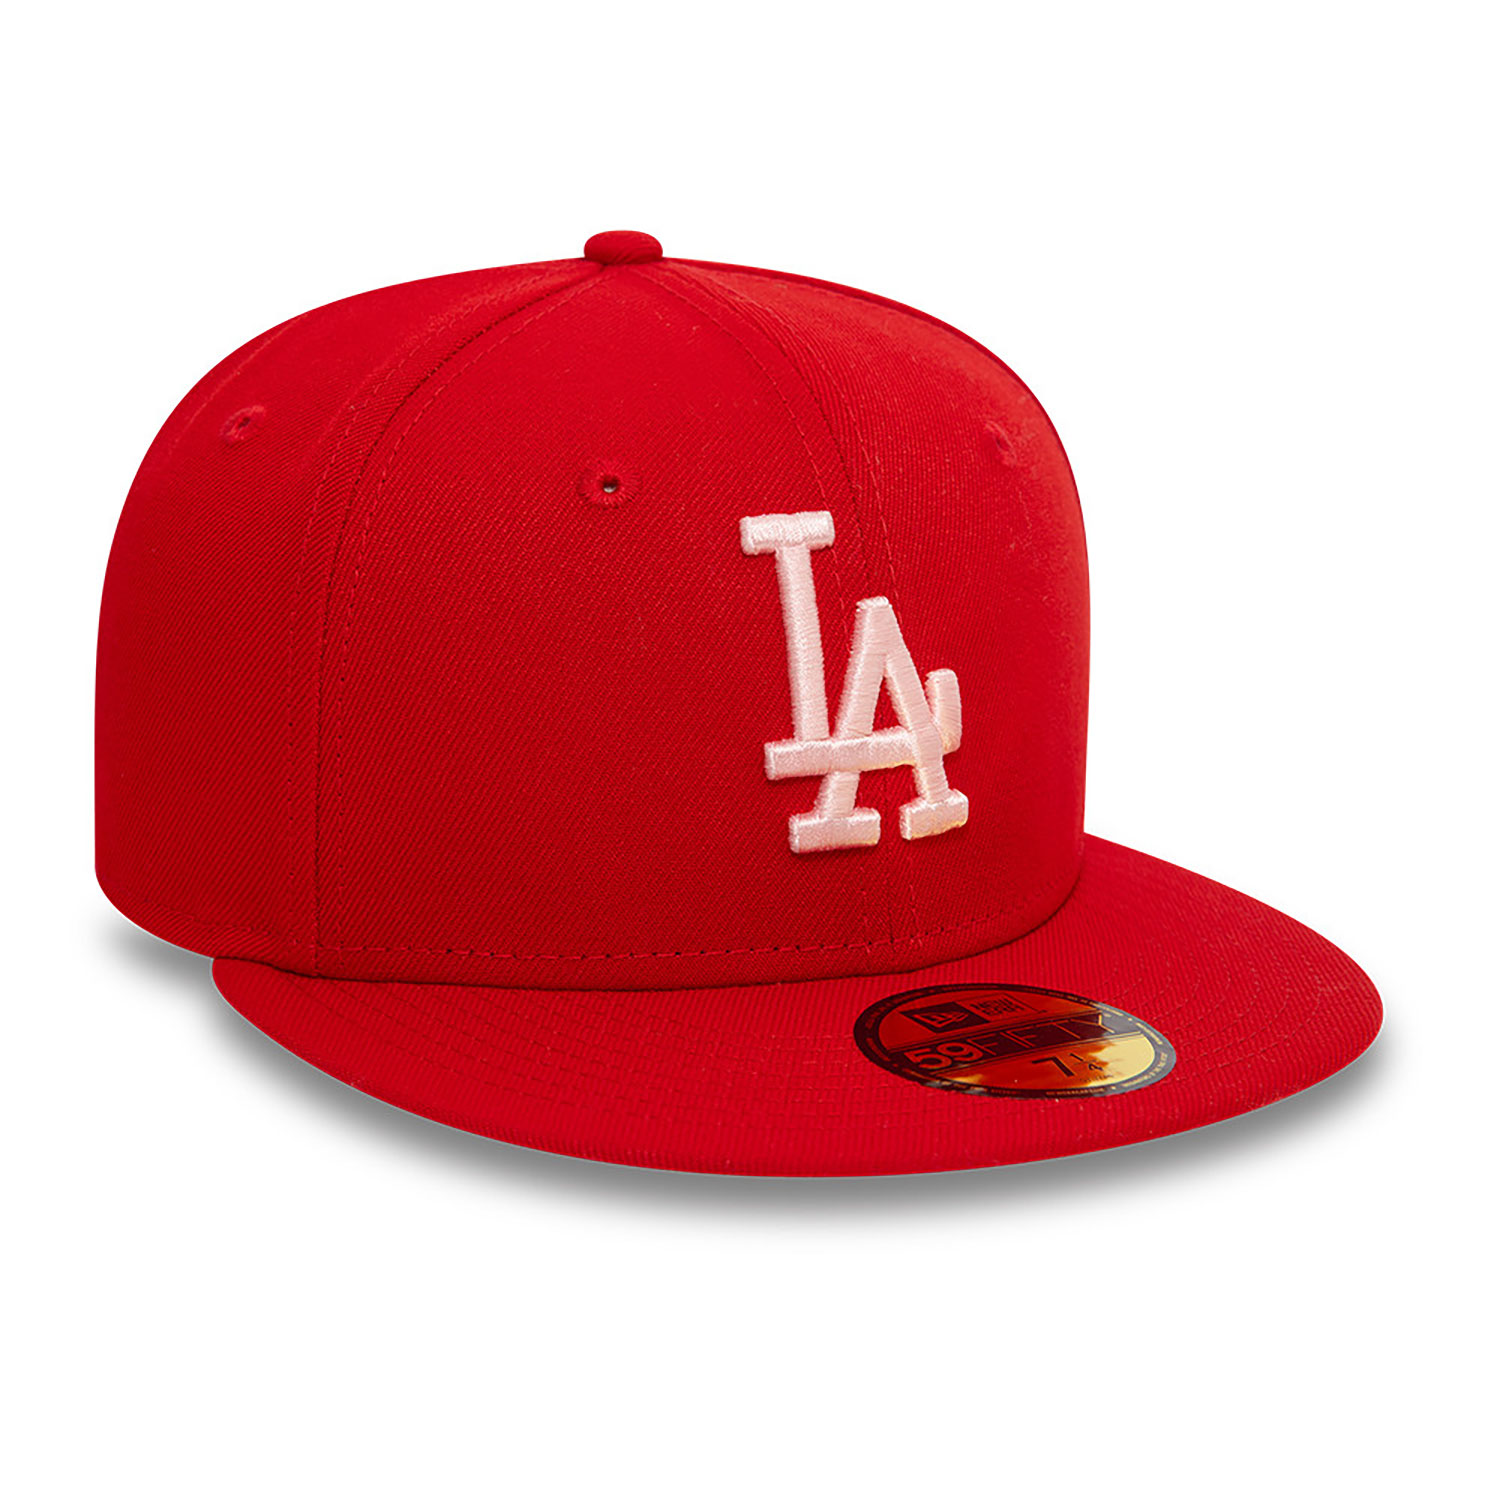 LA Dodgers Pink Red 59FIFTY Fitted Cap